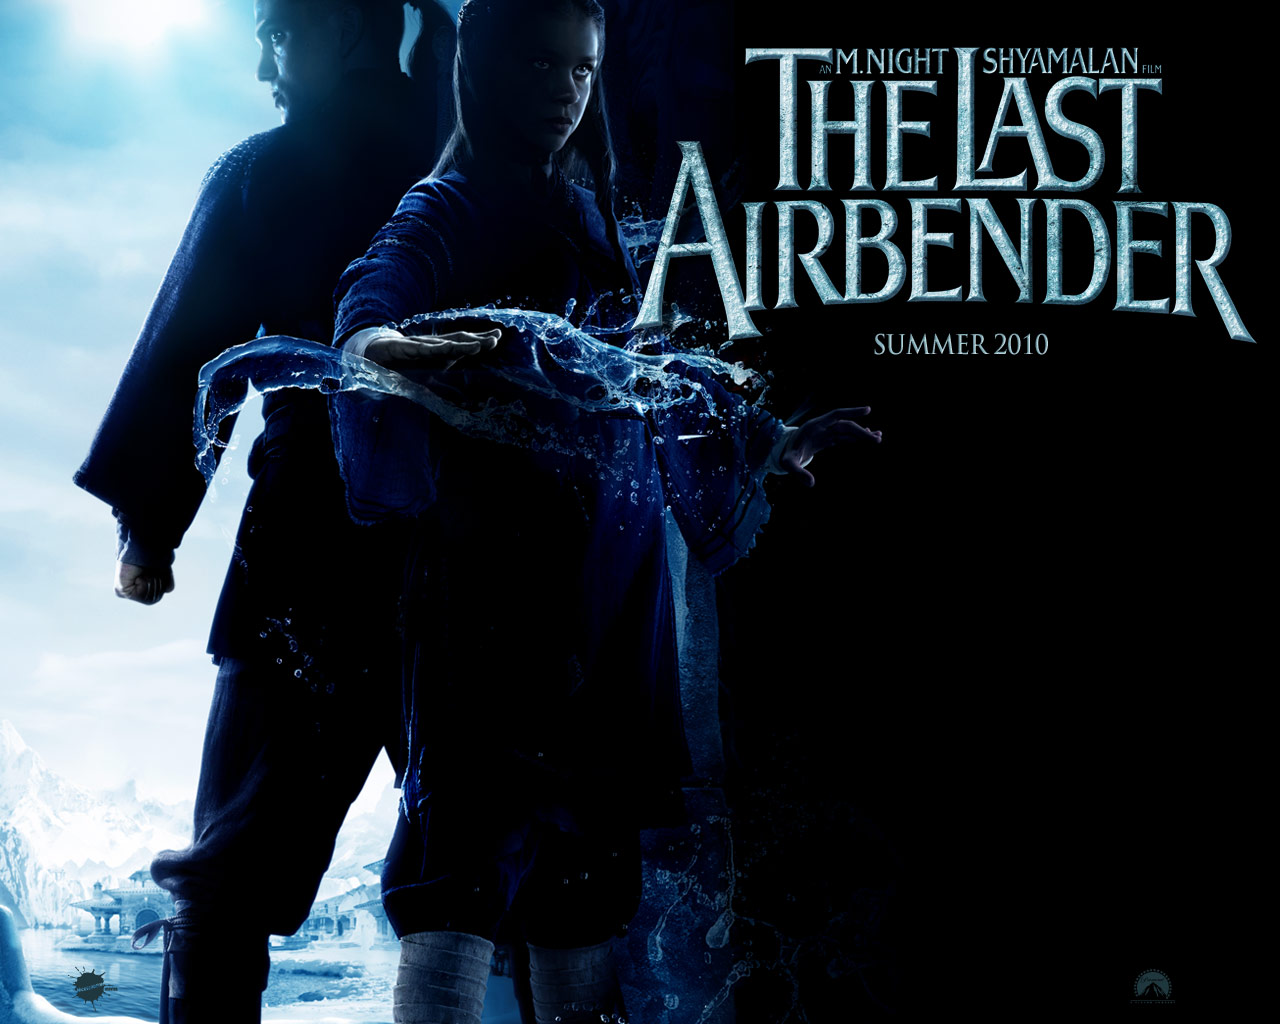 Download full size Water The Last Airbender wallpaper / 1280x1024